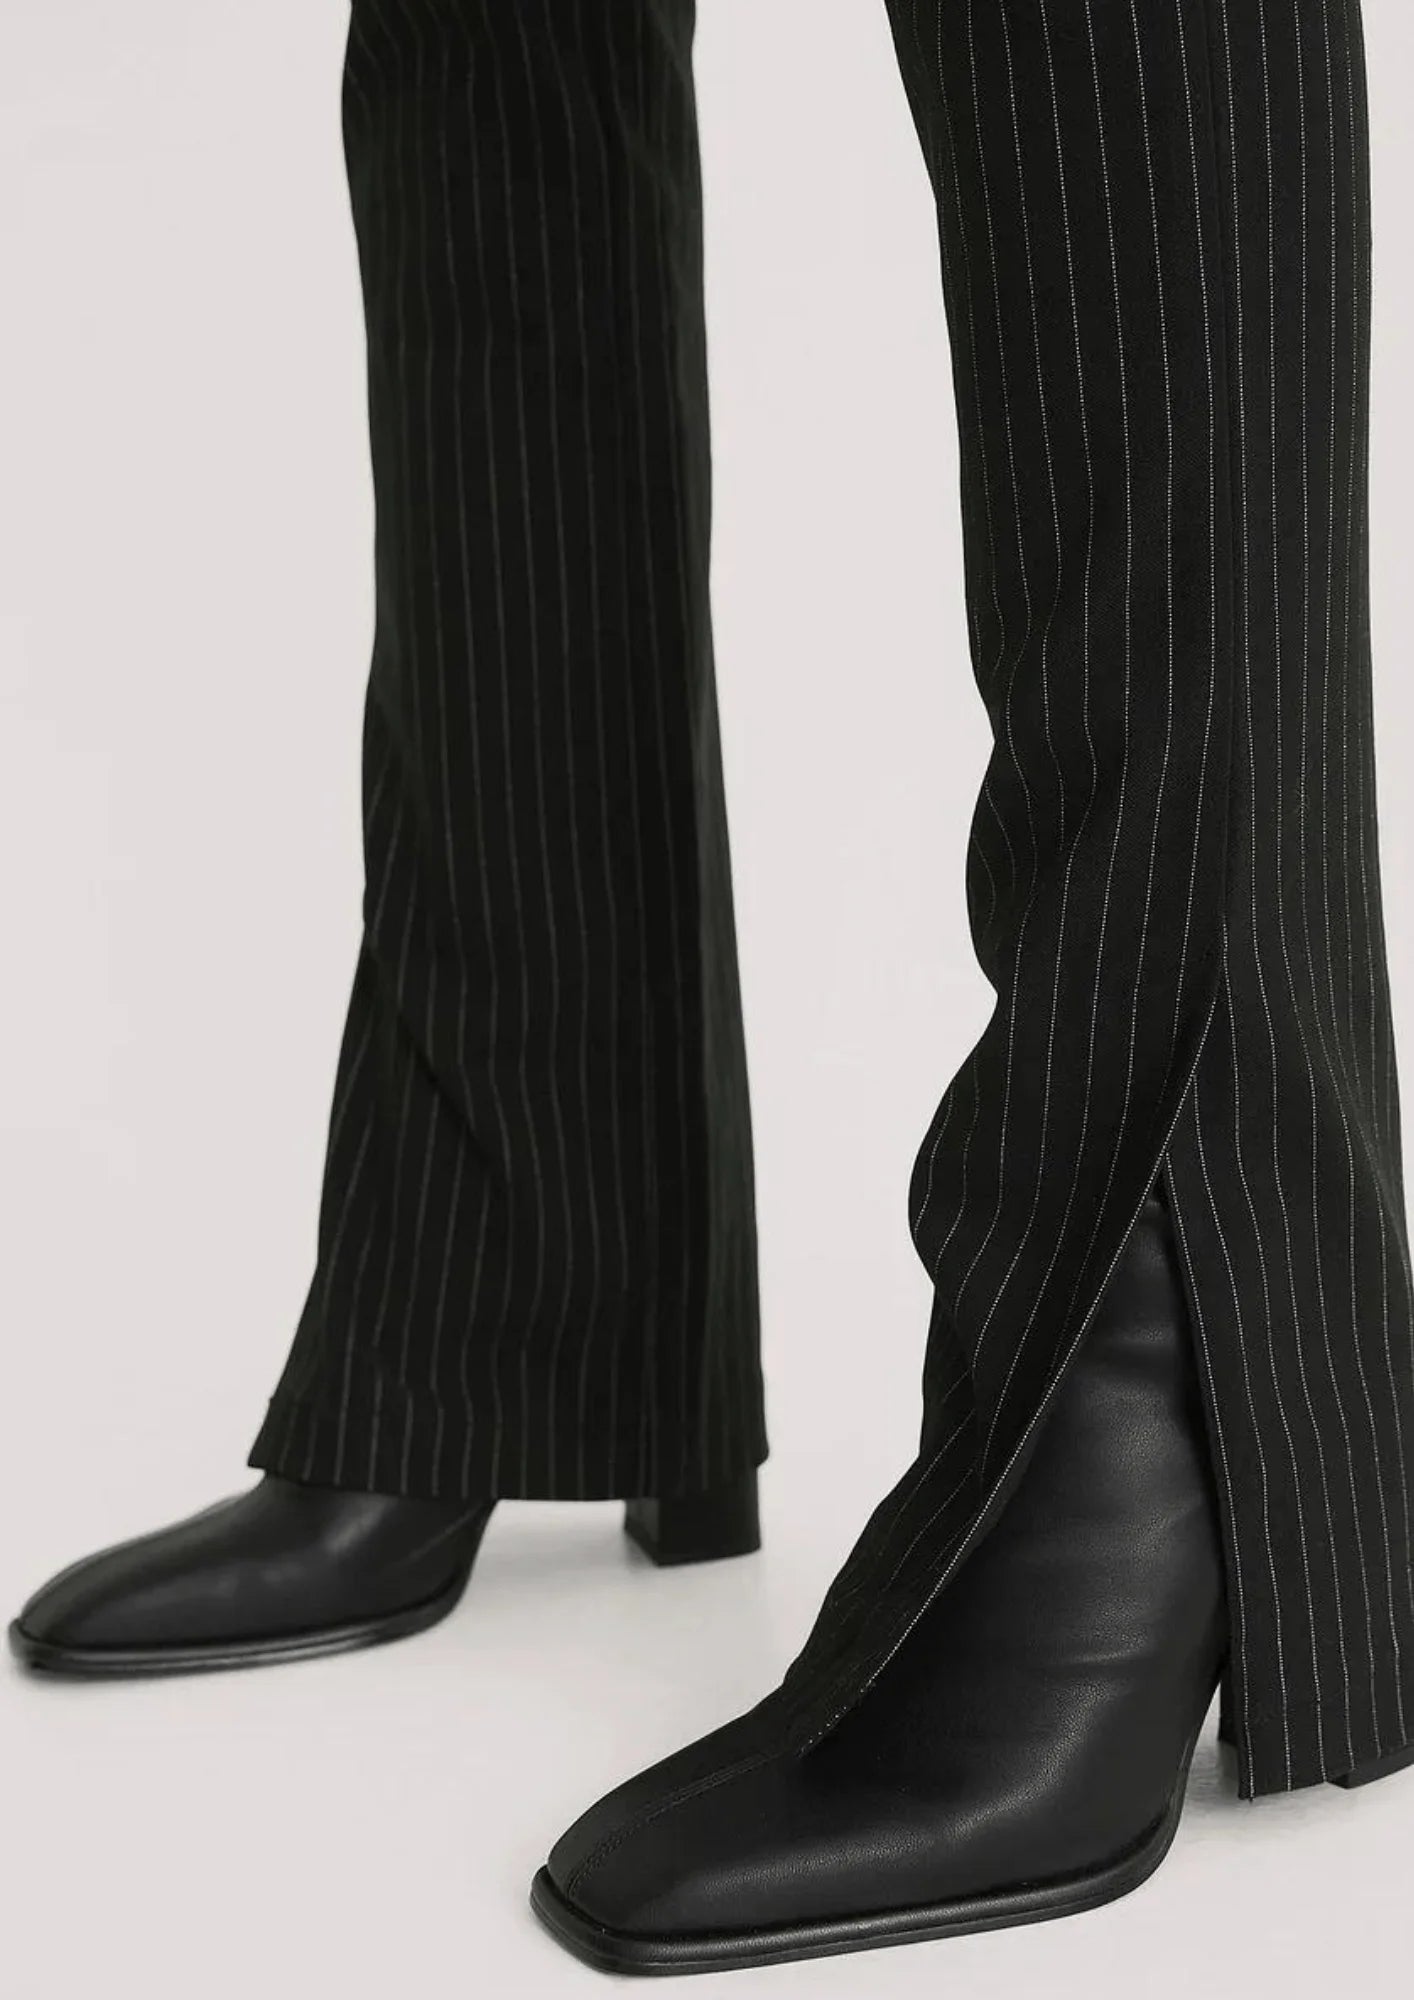 BLACK STRIPED TROUSERS